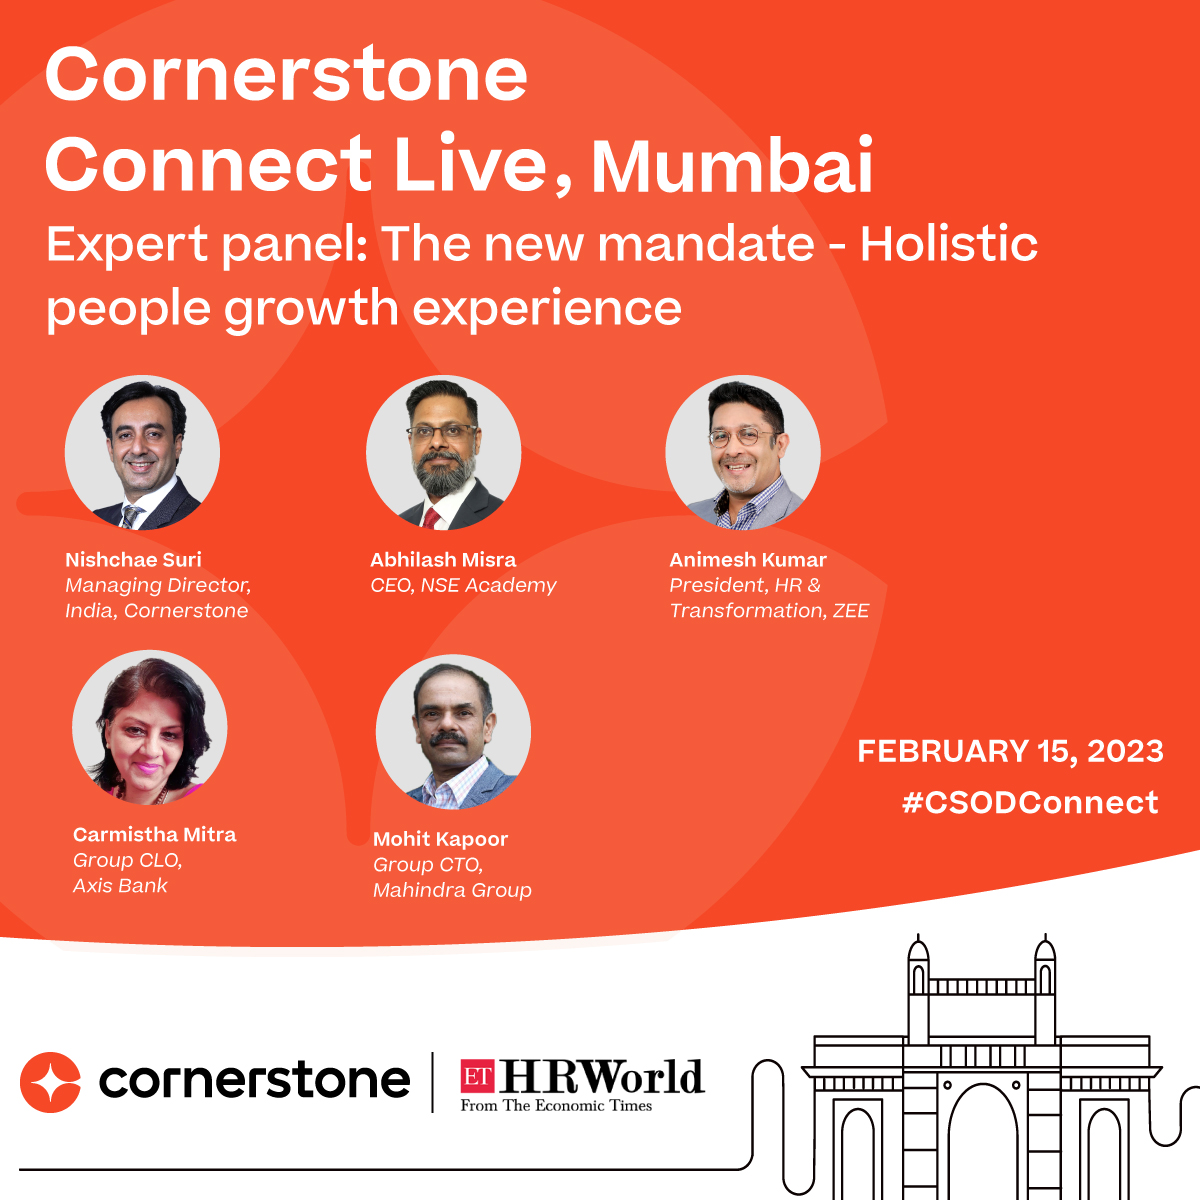 #CSODConnect in association with @ETHrWorld - Unveiling our #Expert Panel.

#CSODConnect
#UnitedInGrowth
@CornerstoneInc | @EdCast by Cornerstone | @SumTotalSystems Systems, LLC